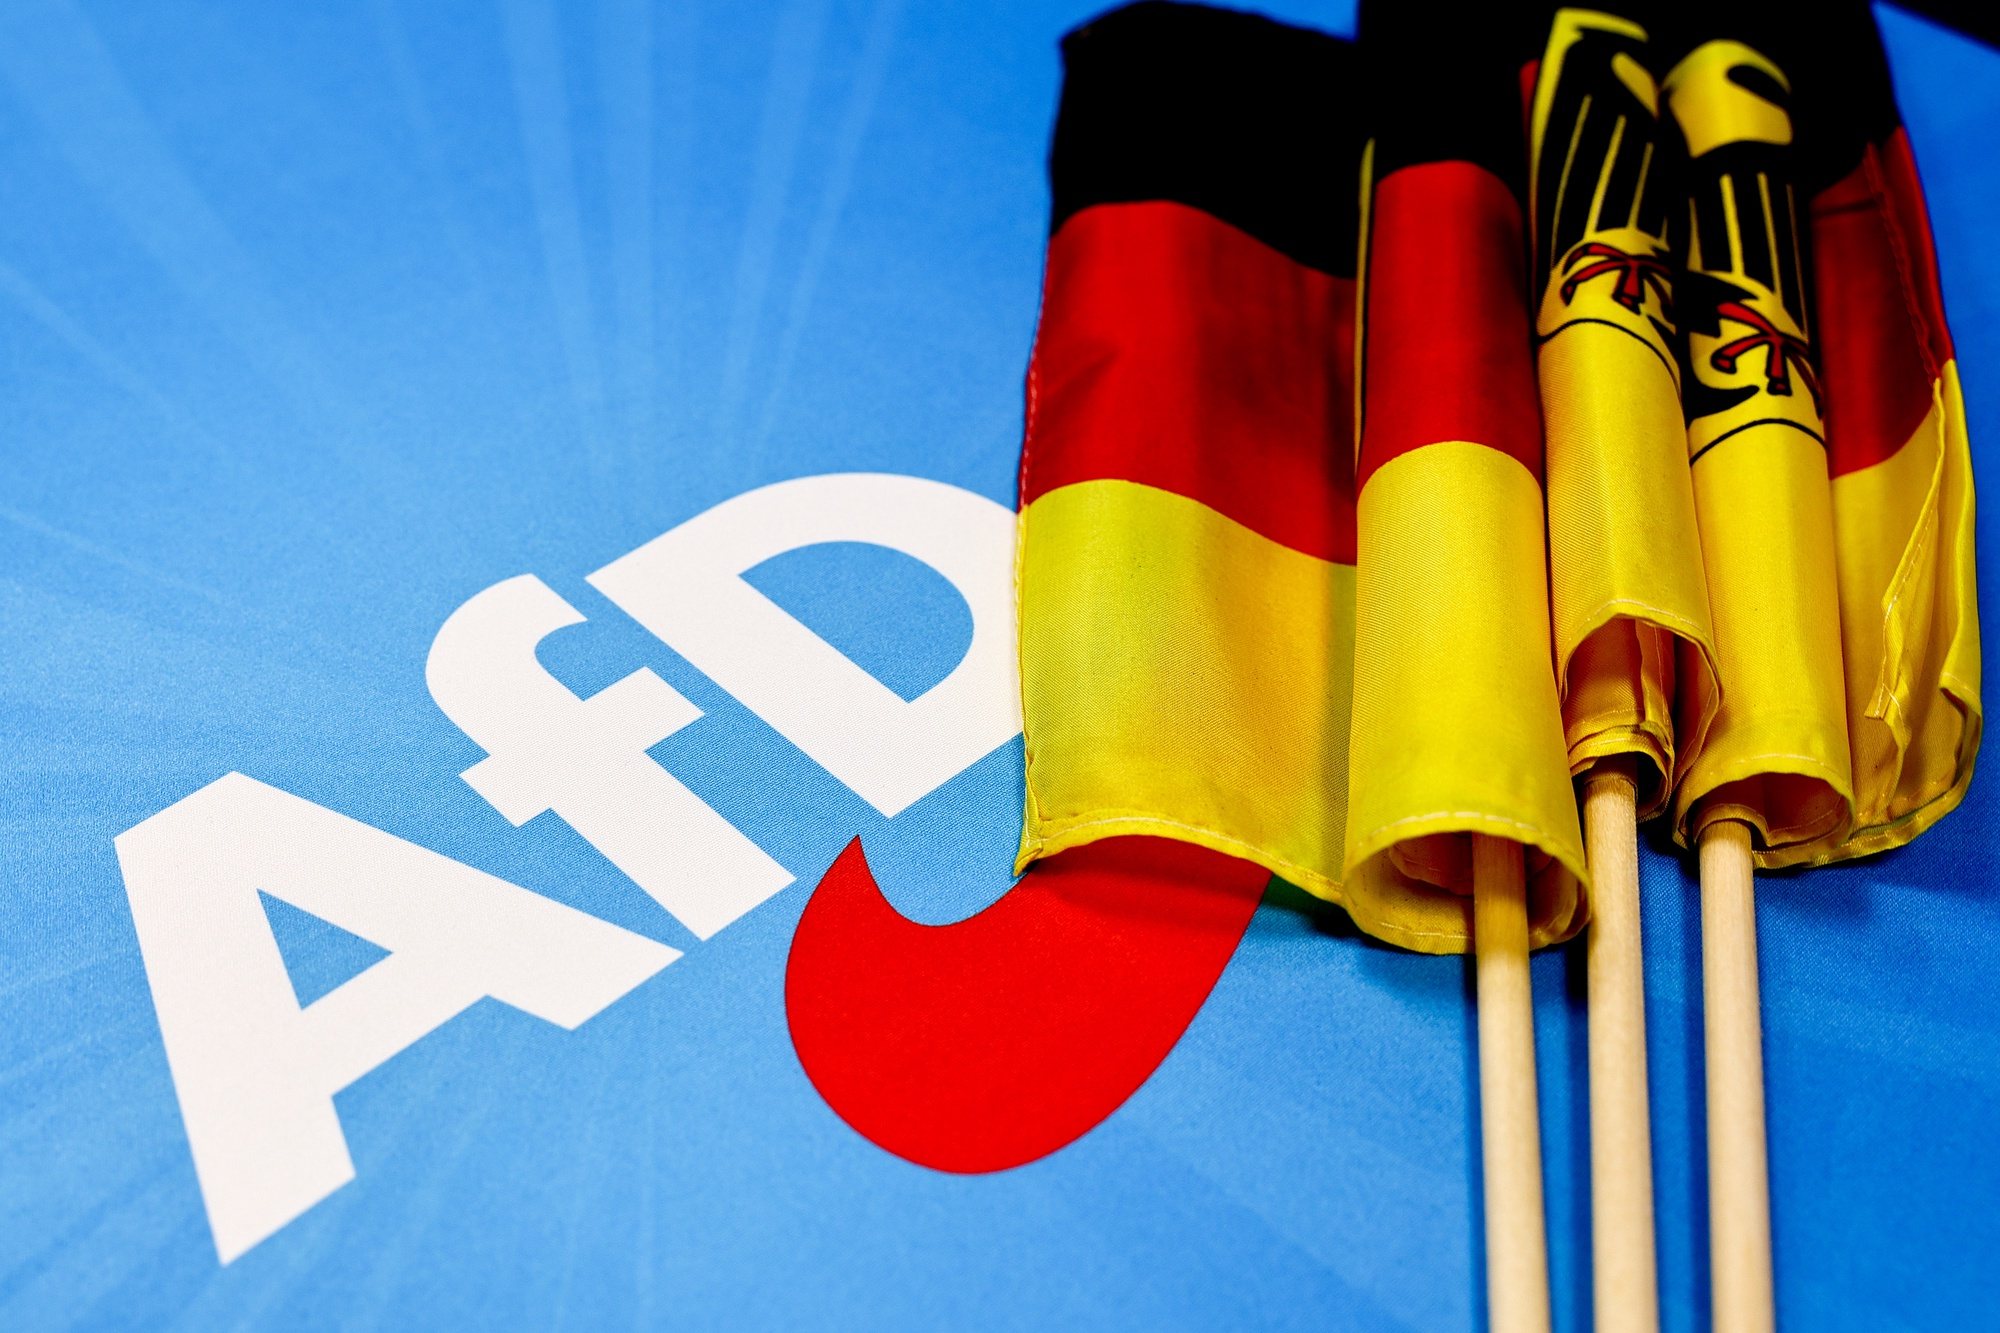 epa11400481 German flags are seen on a table-cloth with Alternative for Germany (AfD) logo at the election party during the Alternative for Germany (AfD) election event in Berlin, Germany, 09 June 2024. The European Parliament elections take place across EU member states from 06 to 09 June 2024, with the European elections in Germany being held on 09 June.  EPA/FILIP SINGER